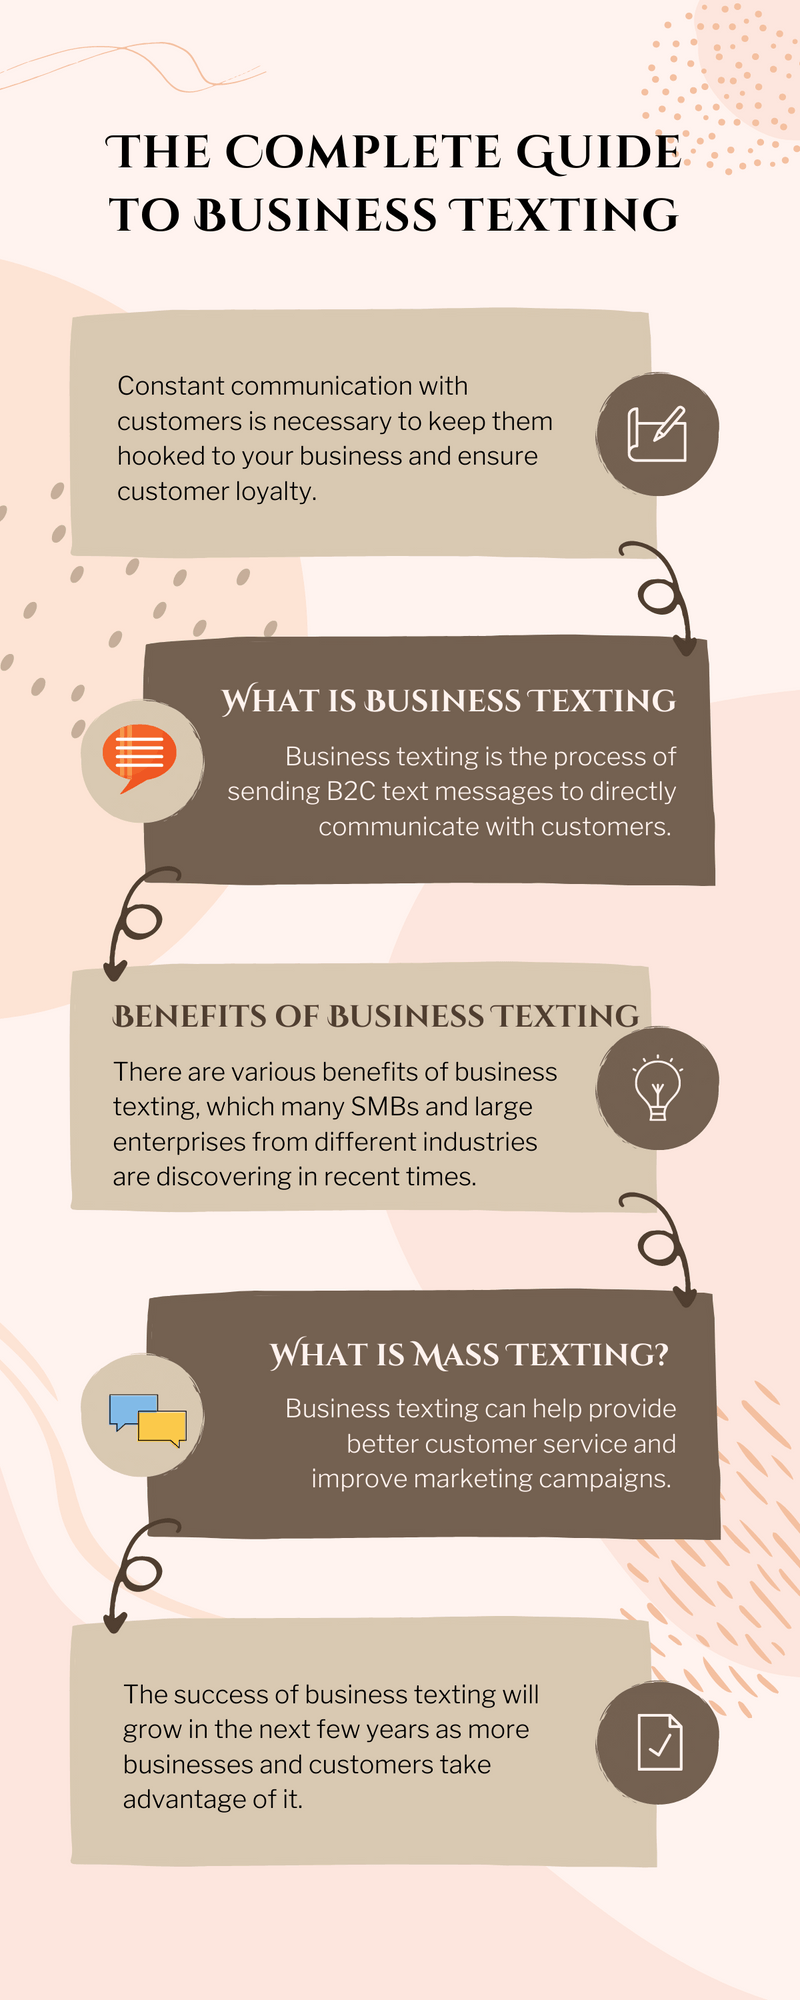 The Complete Guide to Business Texting.png